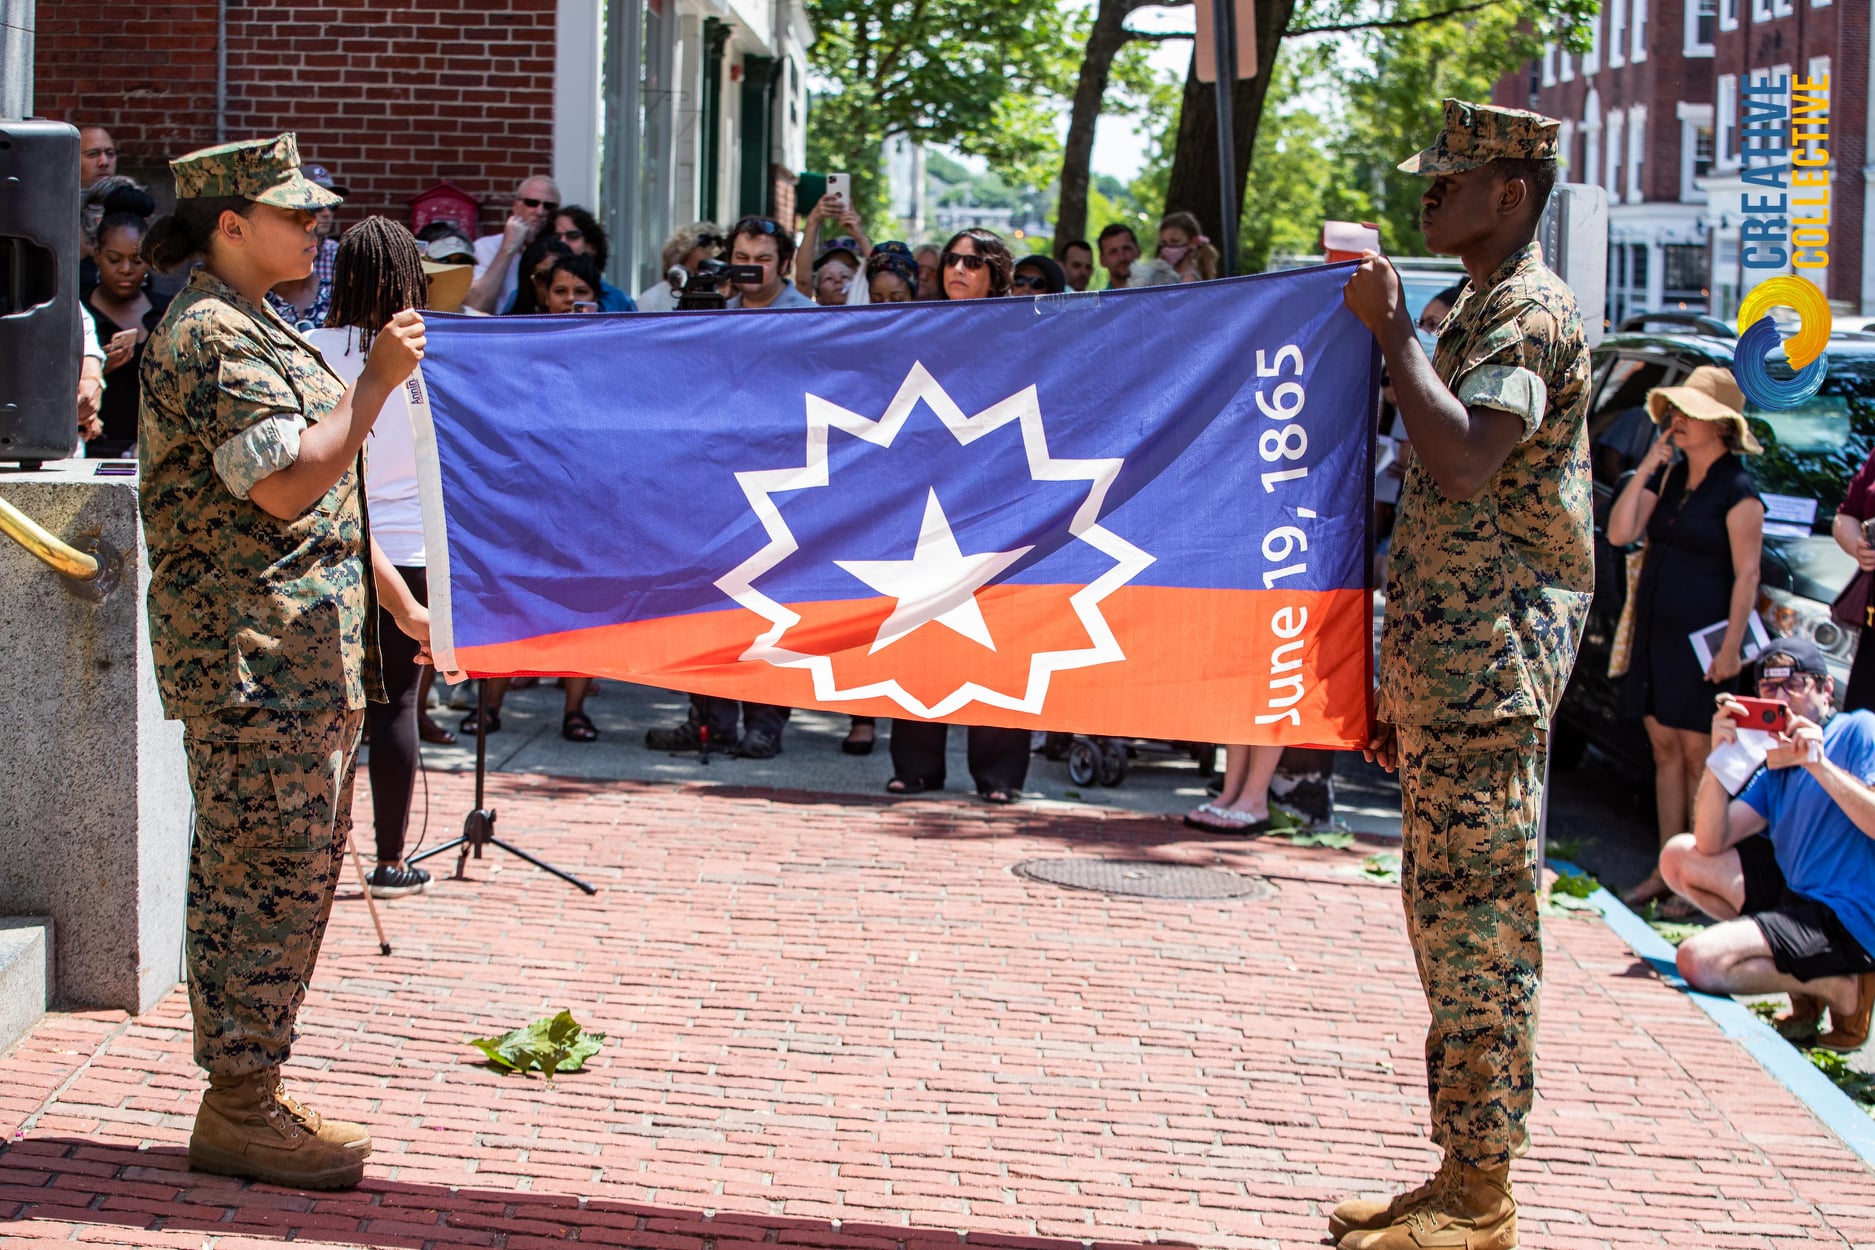 Featured image for “Celebrate Juneteenth North of Boston This June”